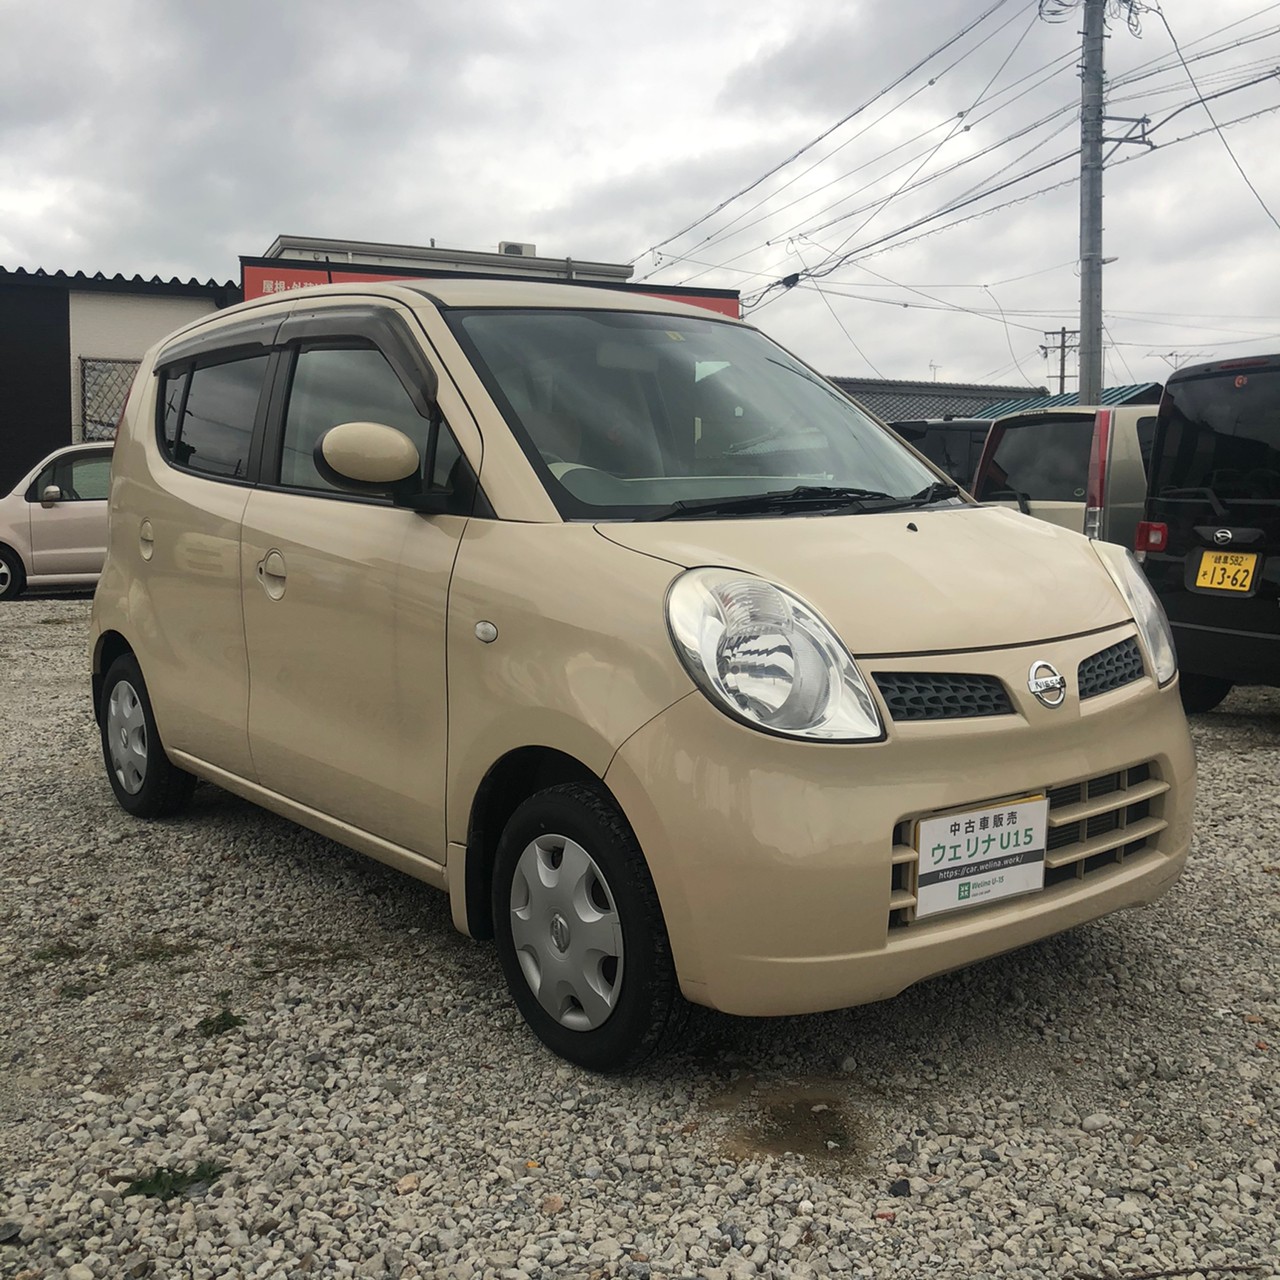 sold】総額7.9万円☆走行3万キロ台☆Tチェーン☆平成18年式 日産 モコ 